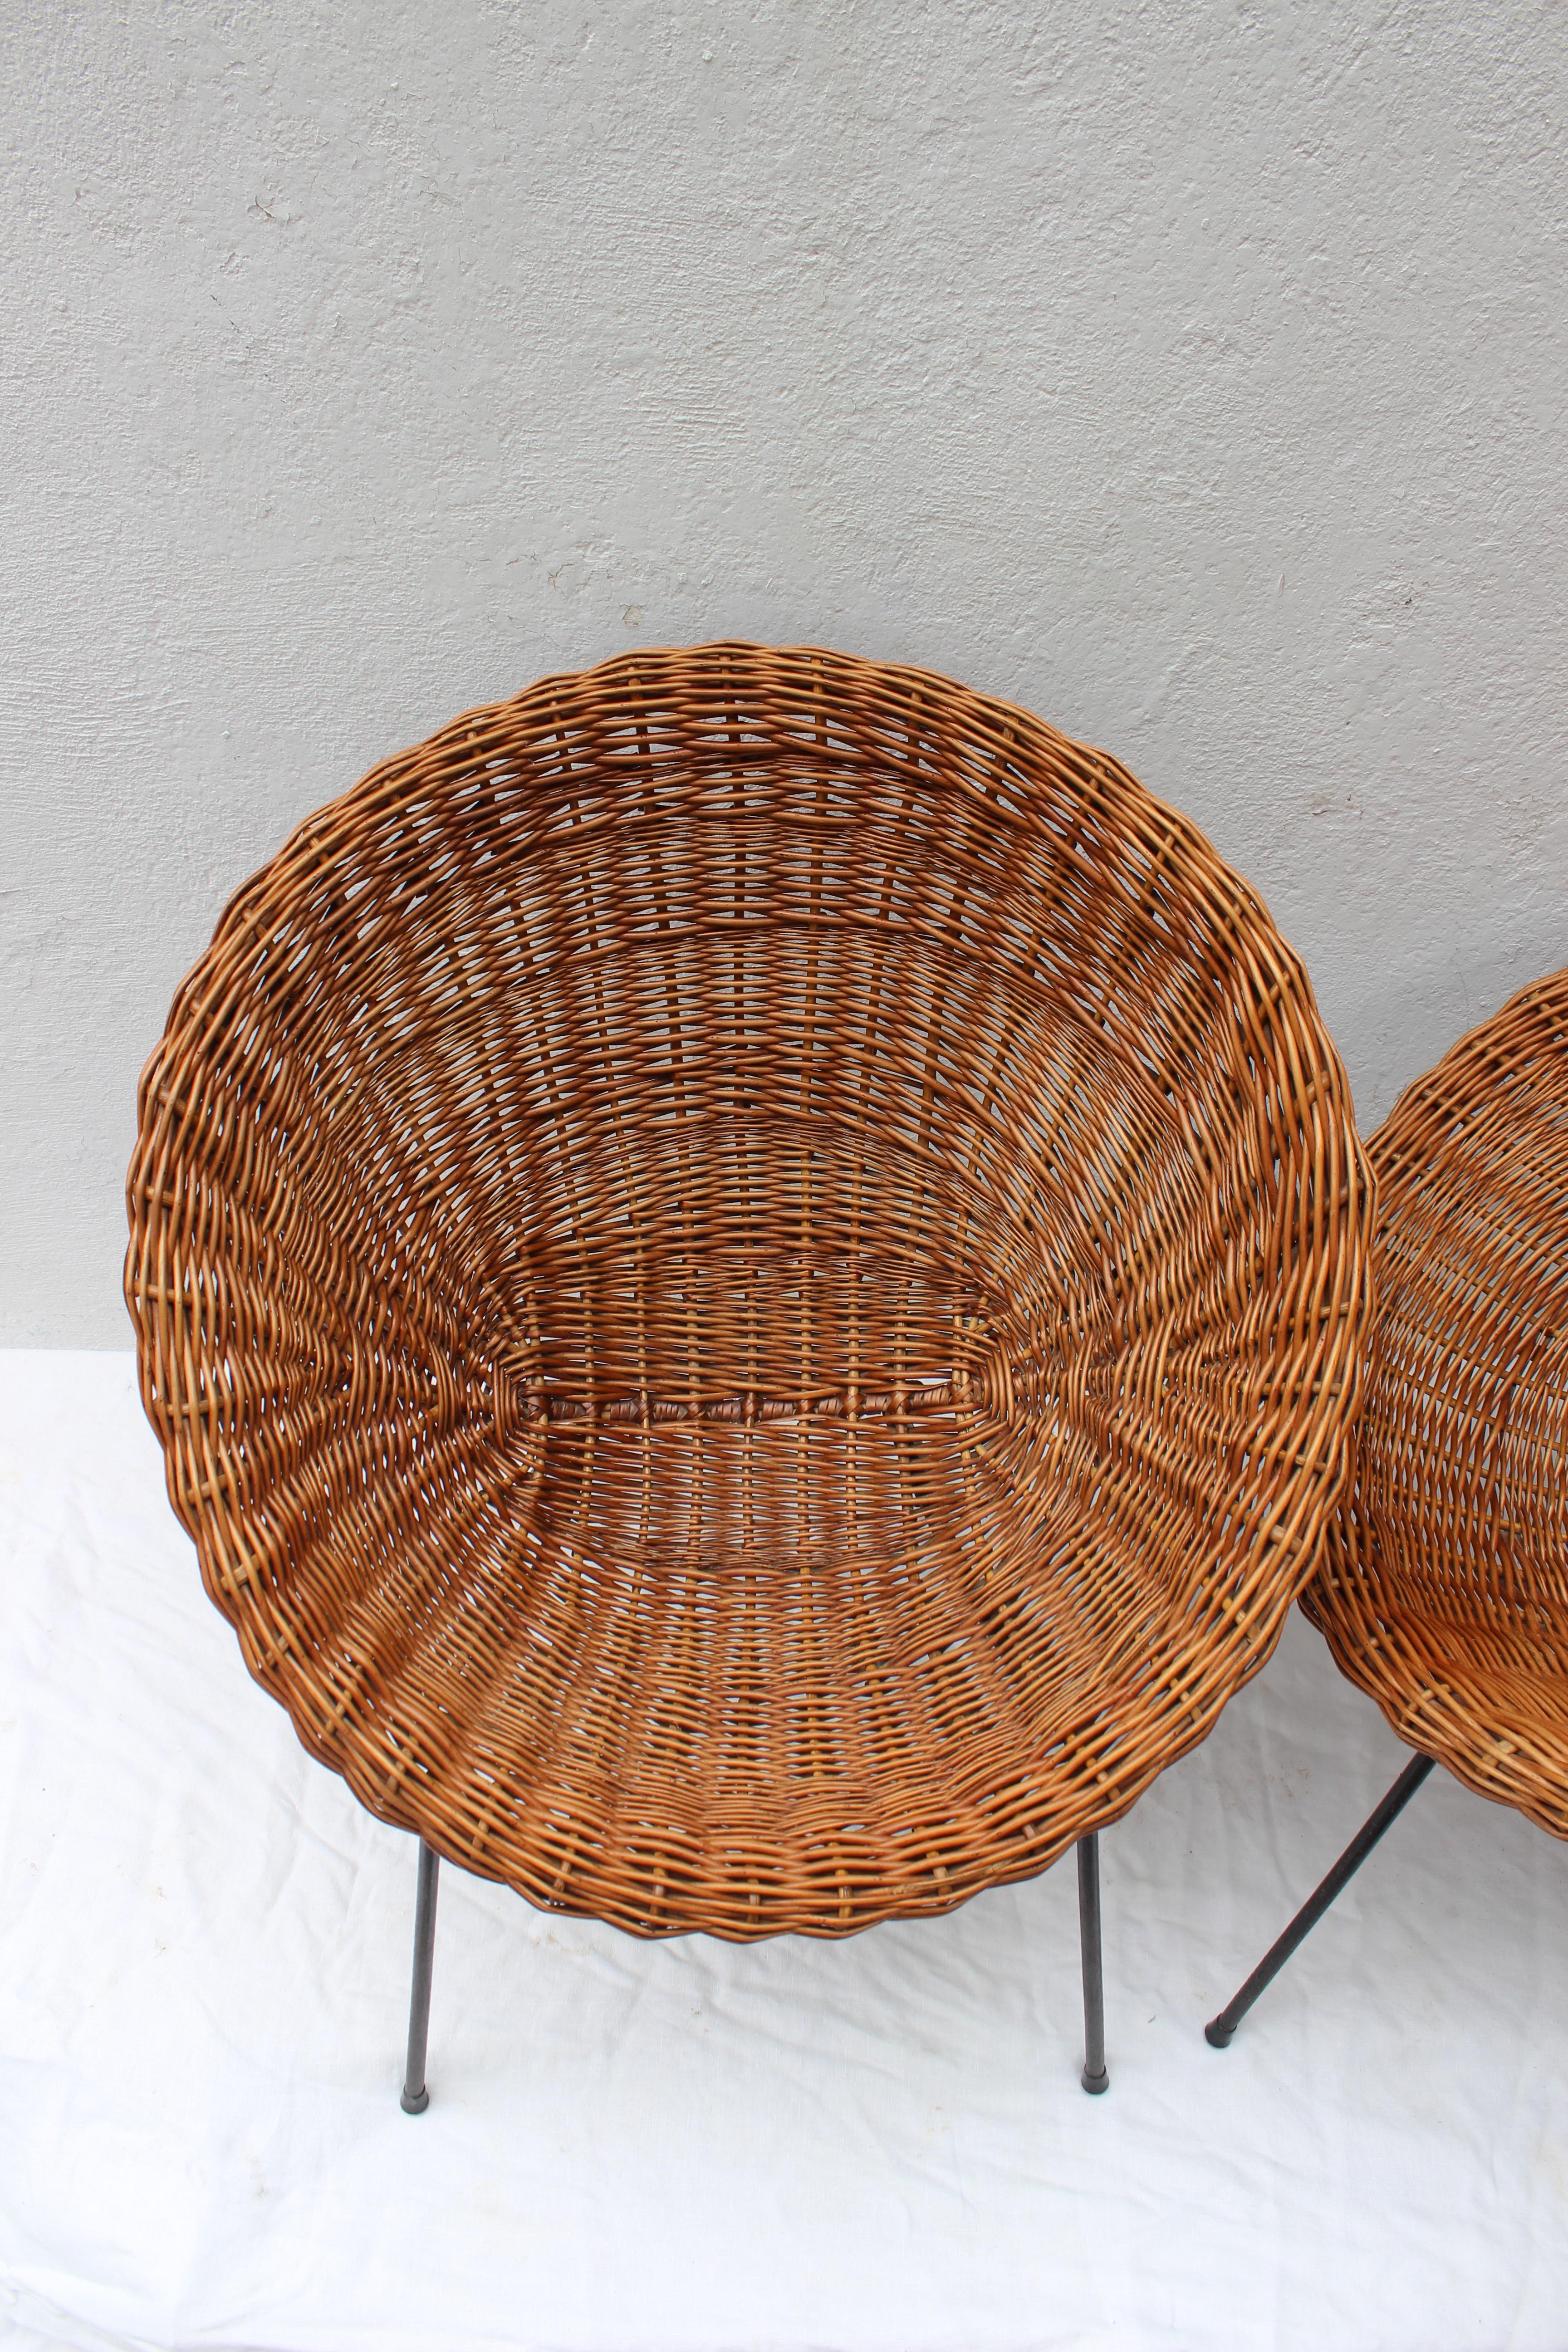 Set of two Italian rattan chairs and table in the style of Franco Albini.

Measures: Chairs 29.5